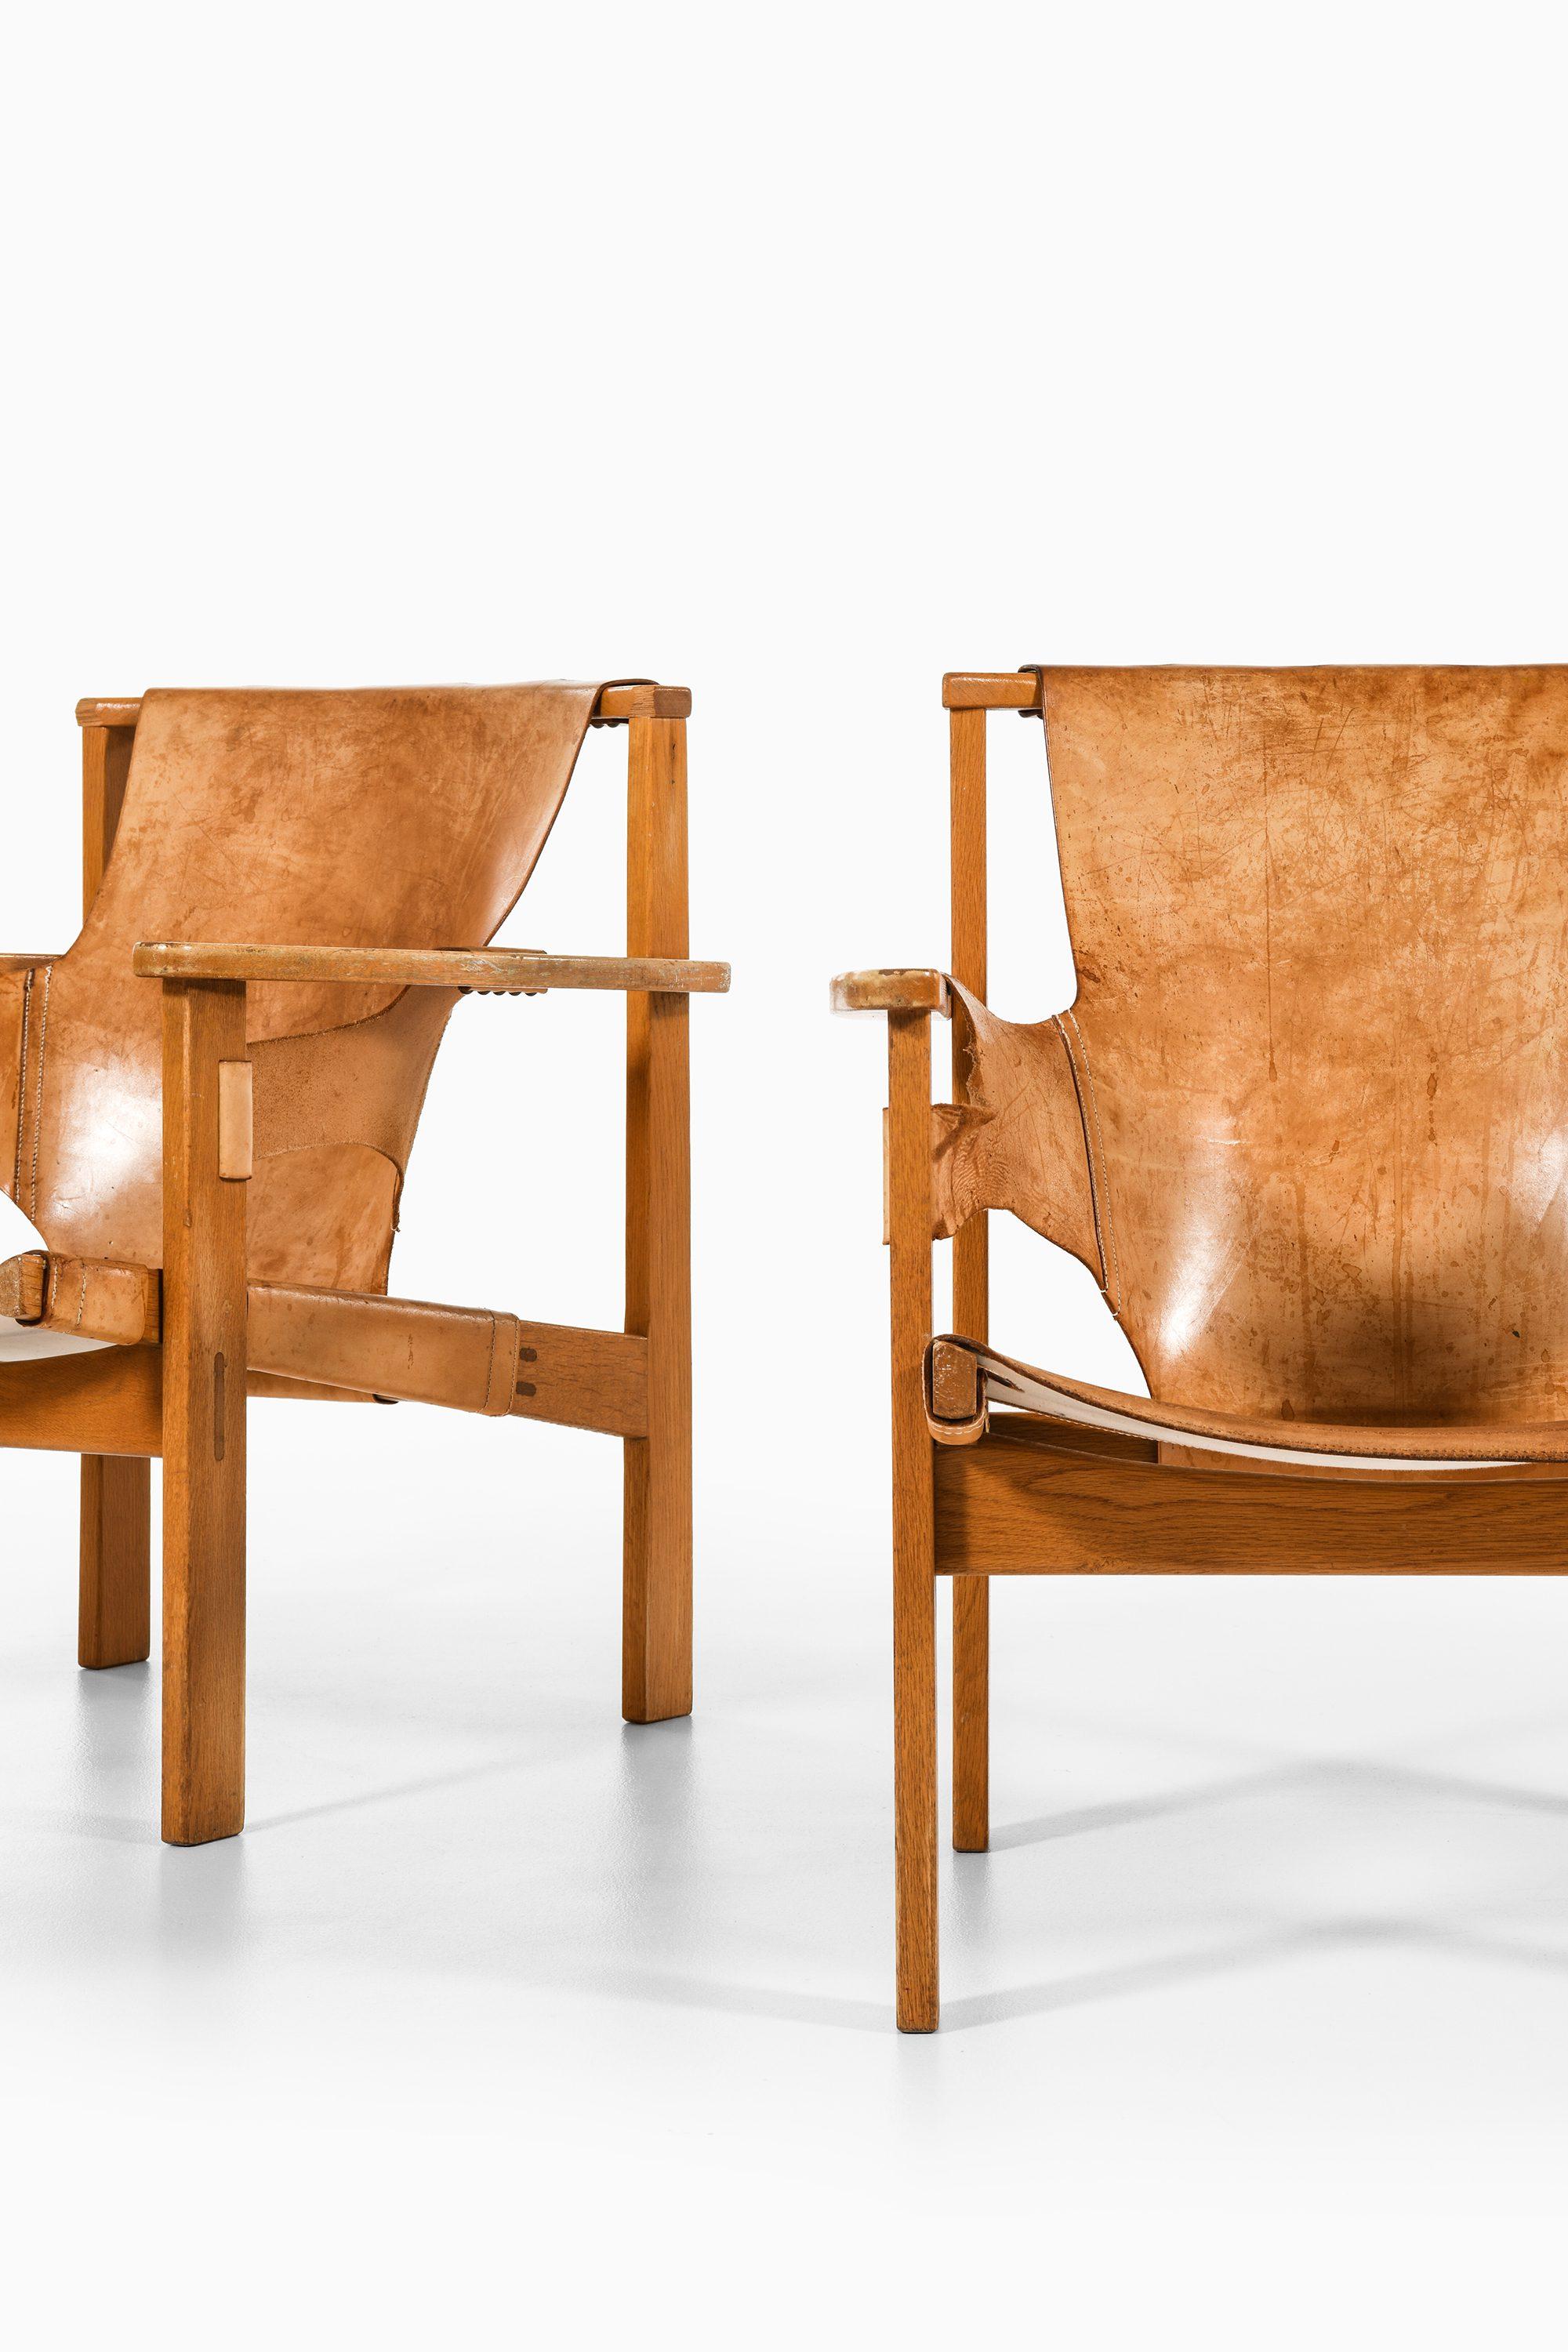 20th Century Pair of Trienna Easy Chairs in Oak & Original Leather by Carl-Axel Acking, 1957